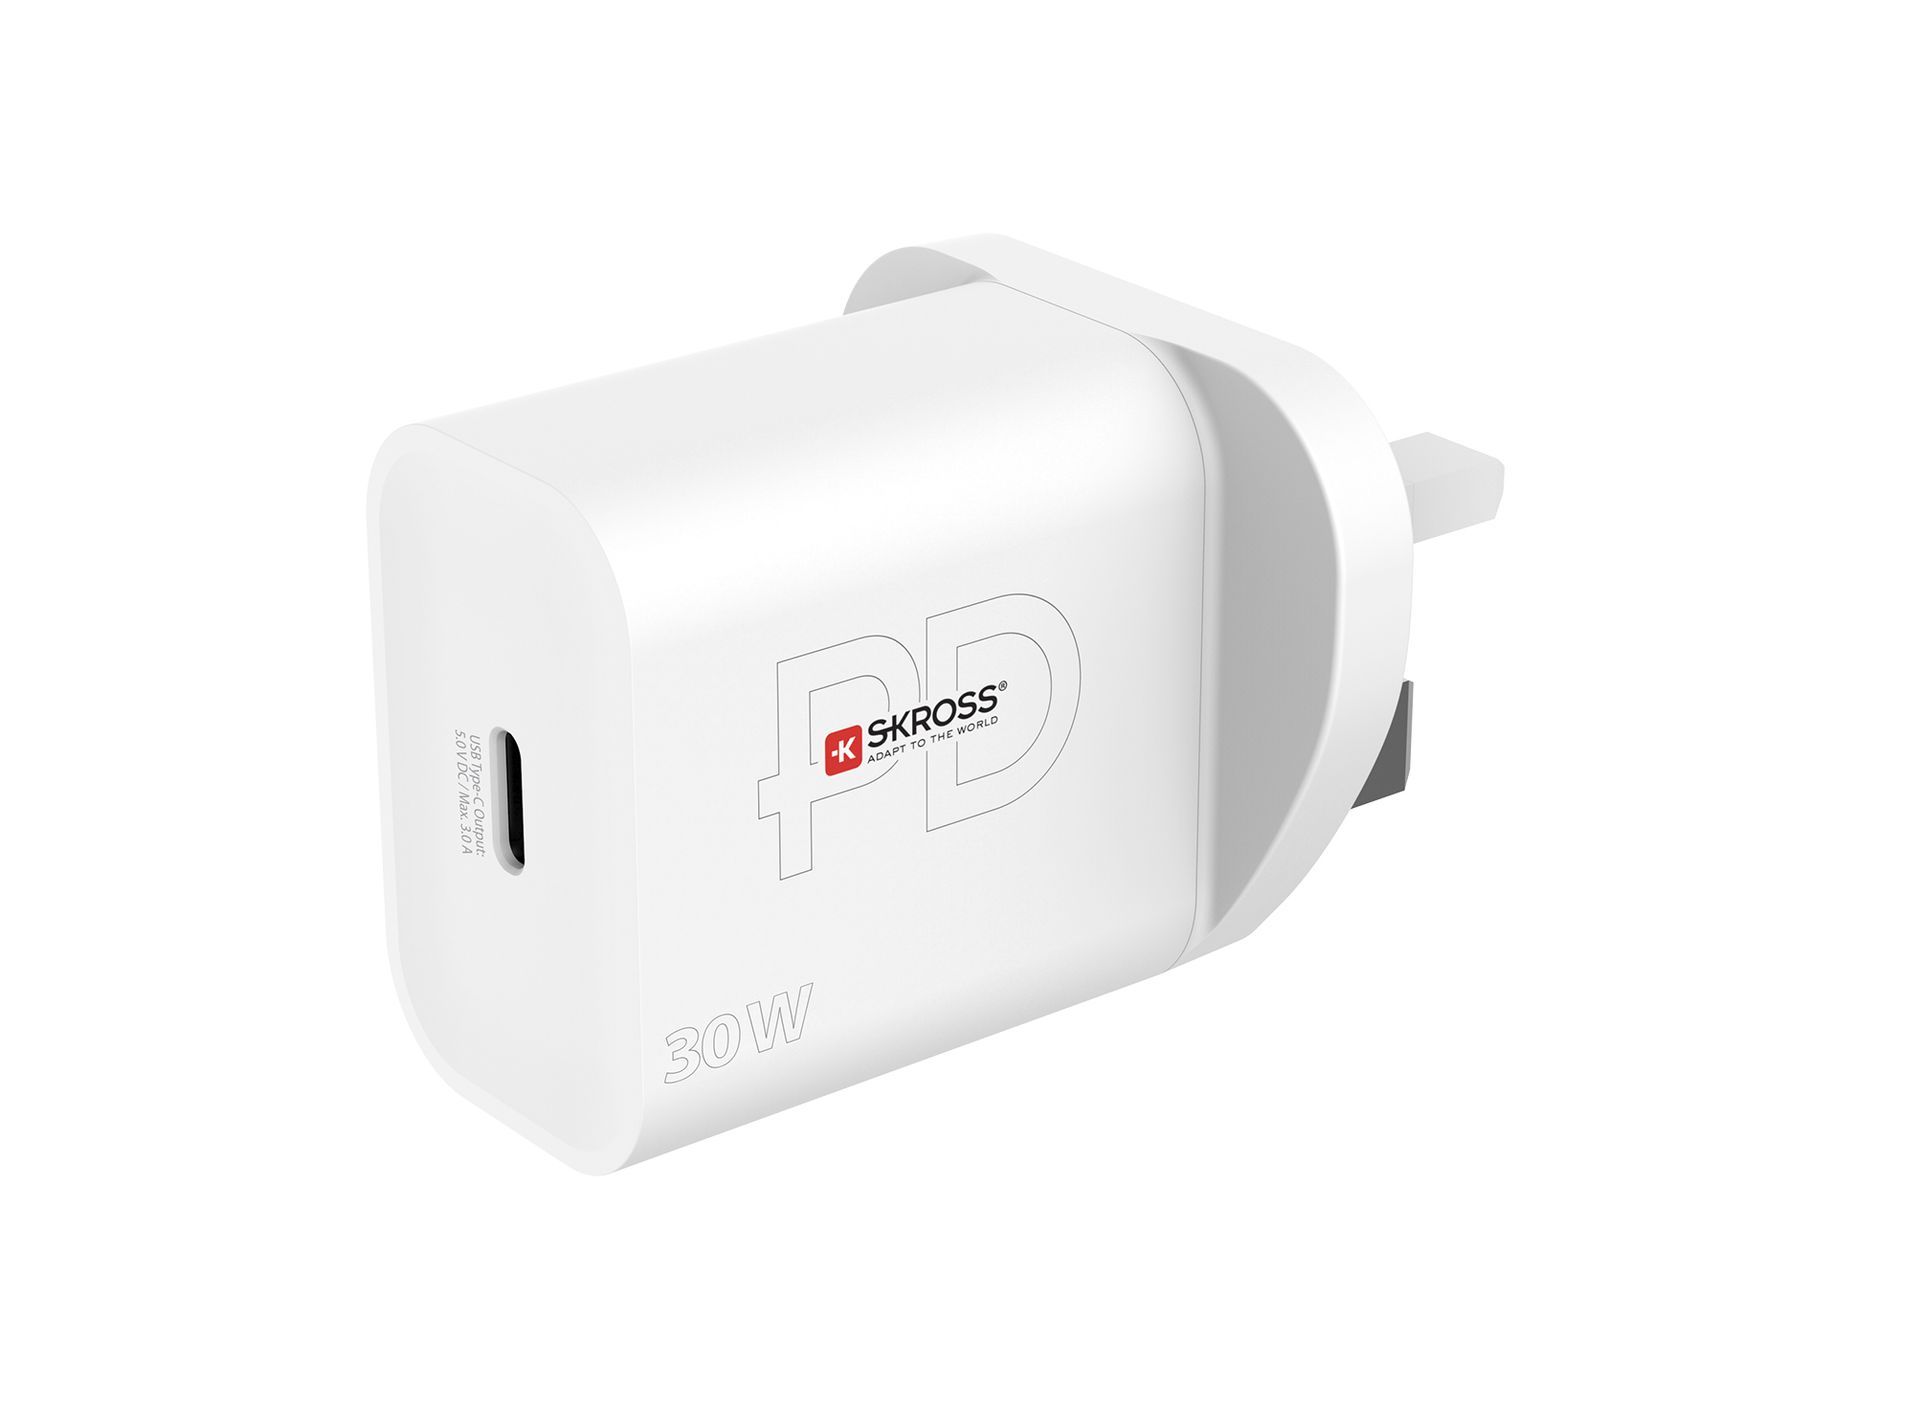 Skross power delivery USB charger UK with USB-C Port angled